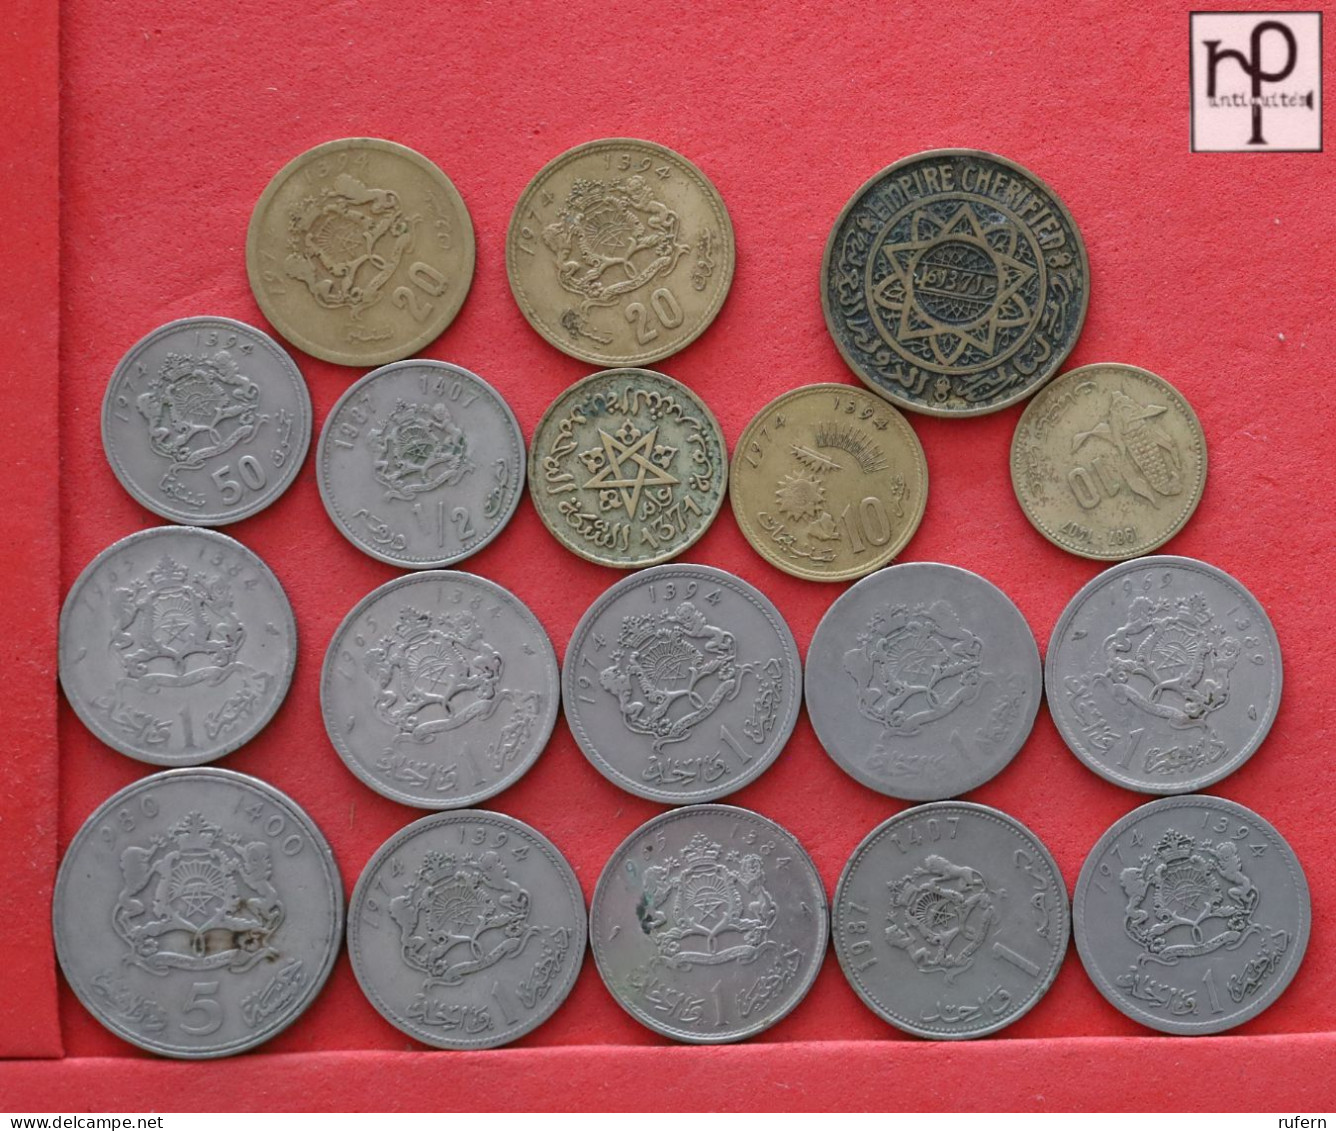 MOROCCO  - LOT - 18 COINS - 2 SCANS  - (Nº58265) - Lots & Kiloware - Coins